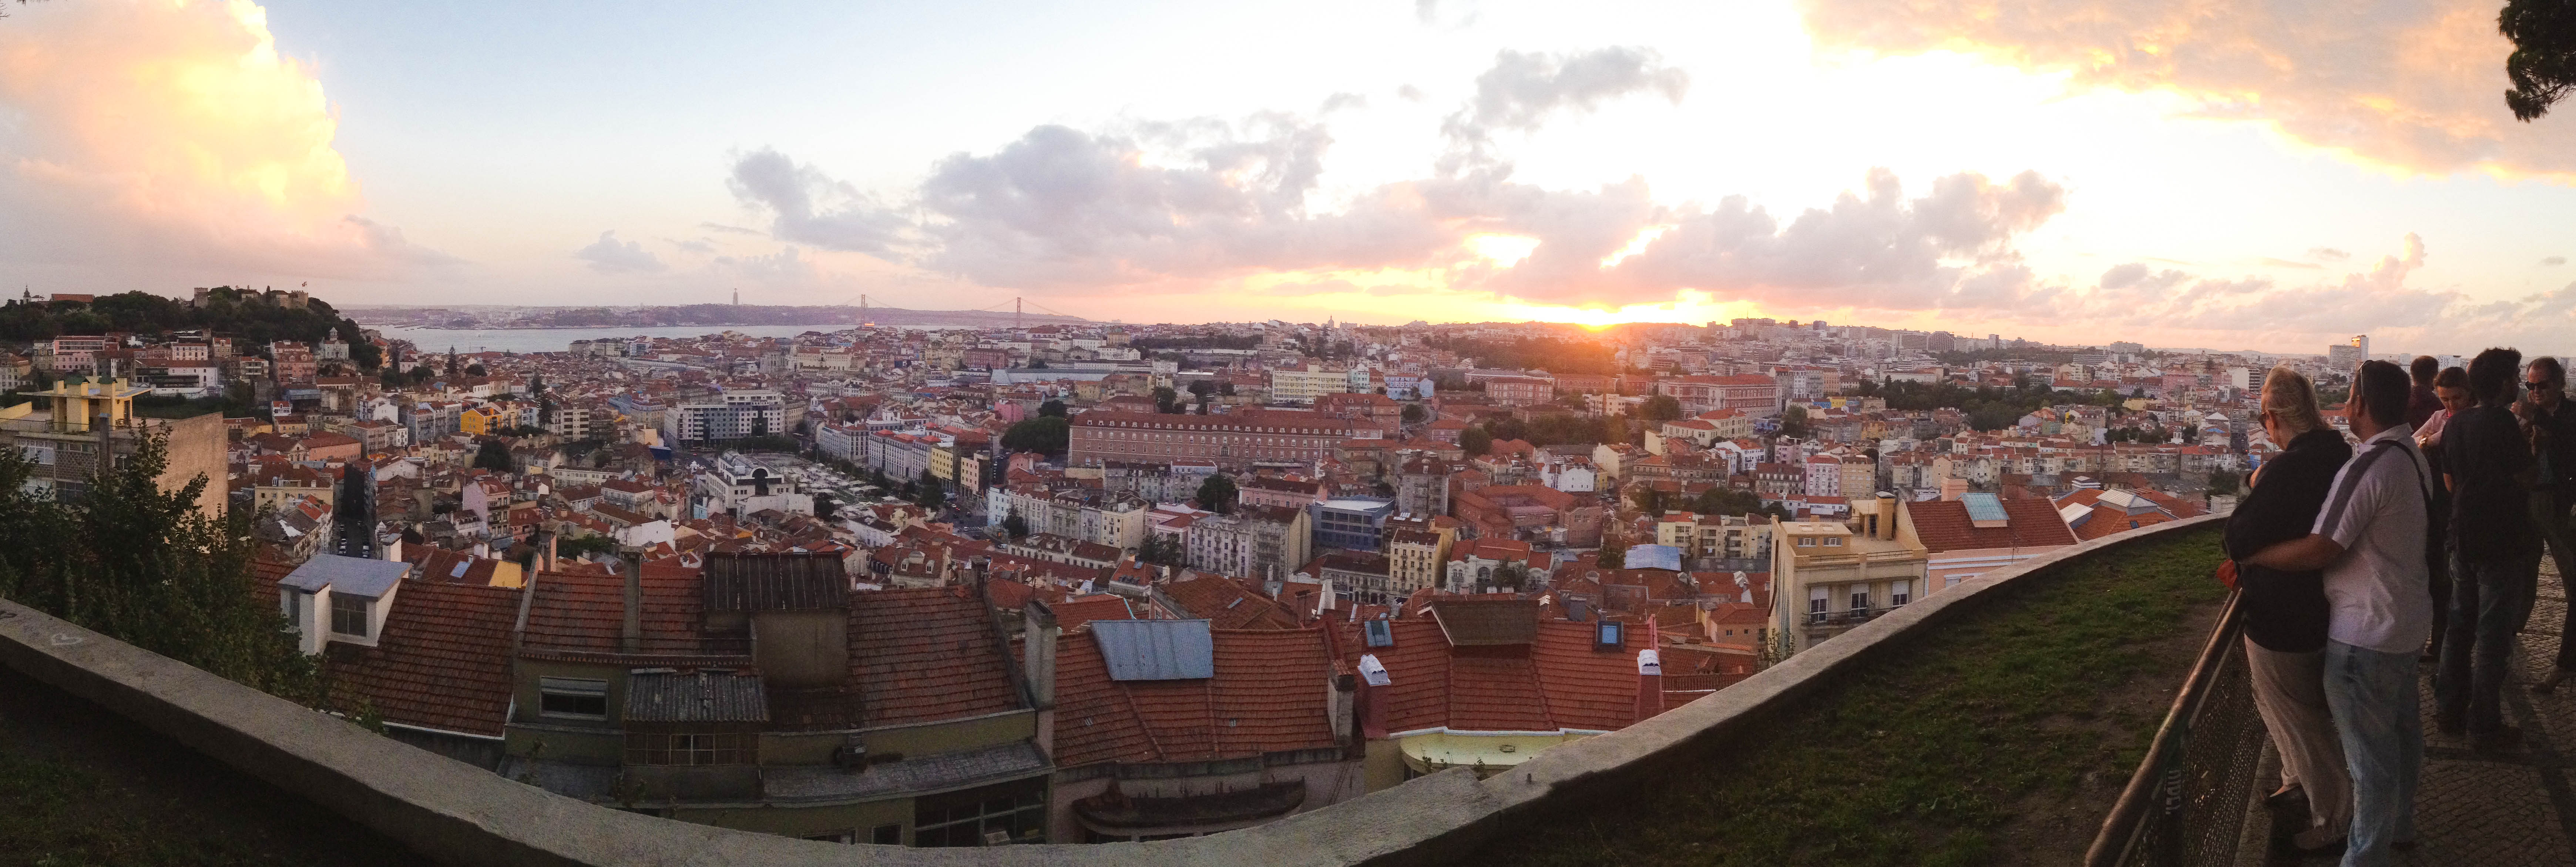 Panorama of Lisbon from a popular viewpoint (click image to enlarge)